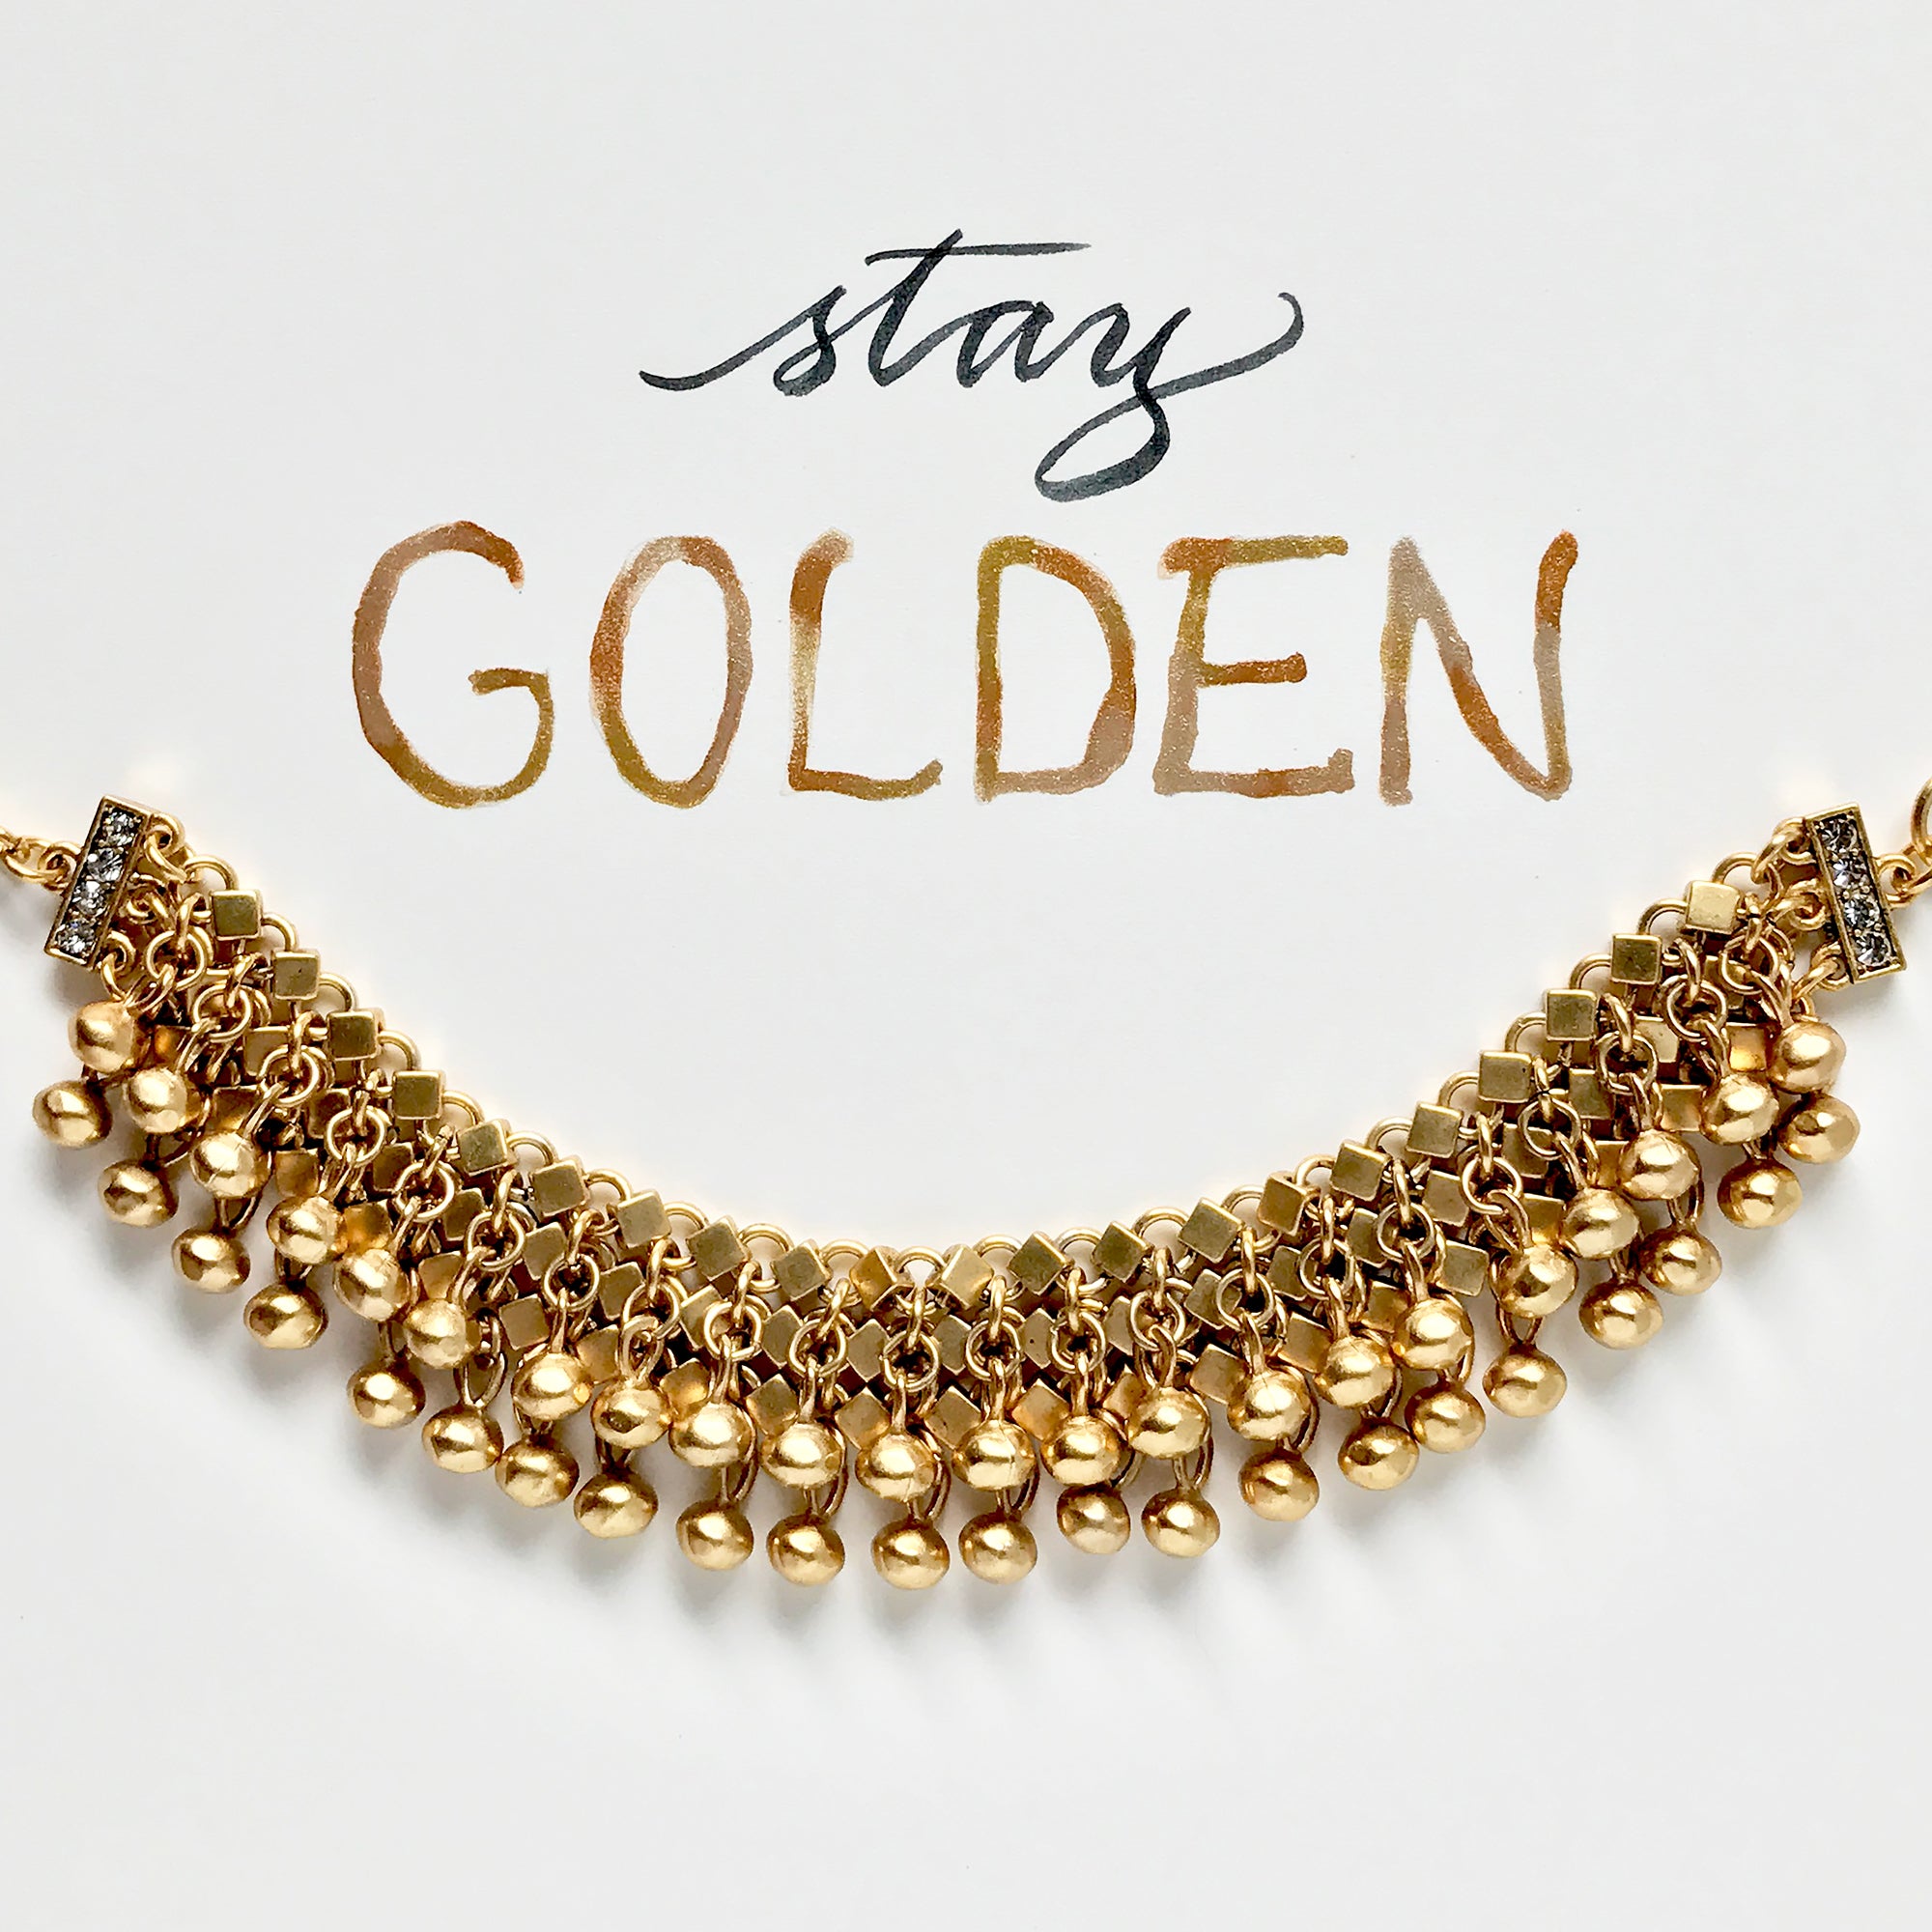 #SequinSayings - Stay Golden